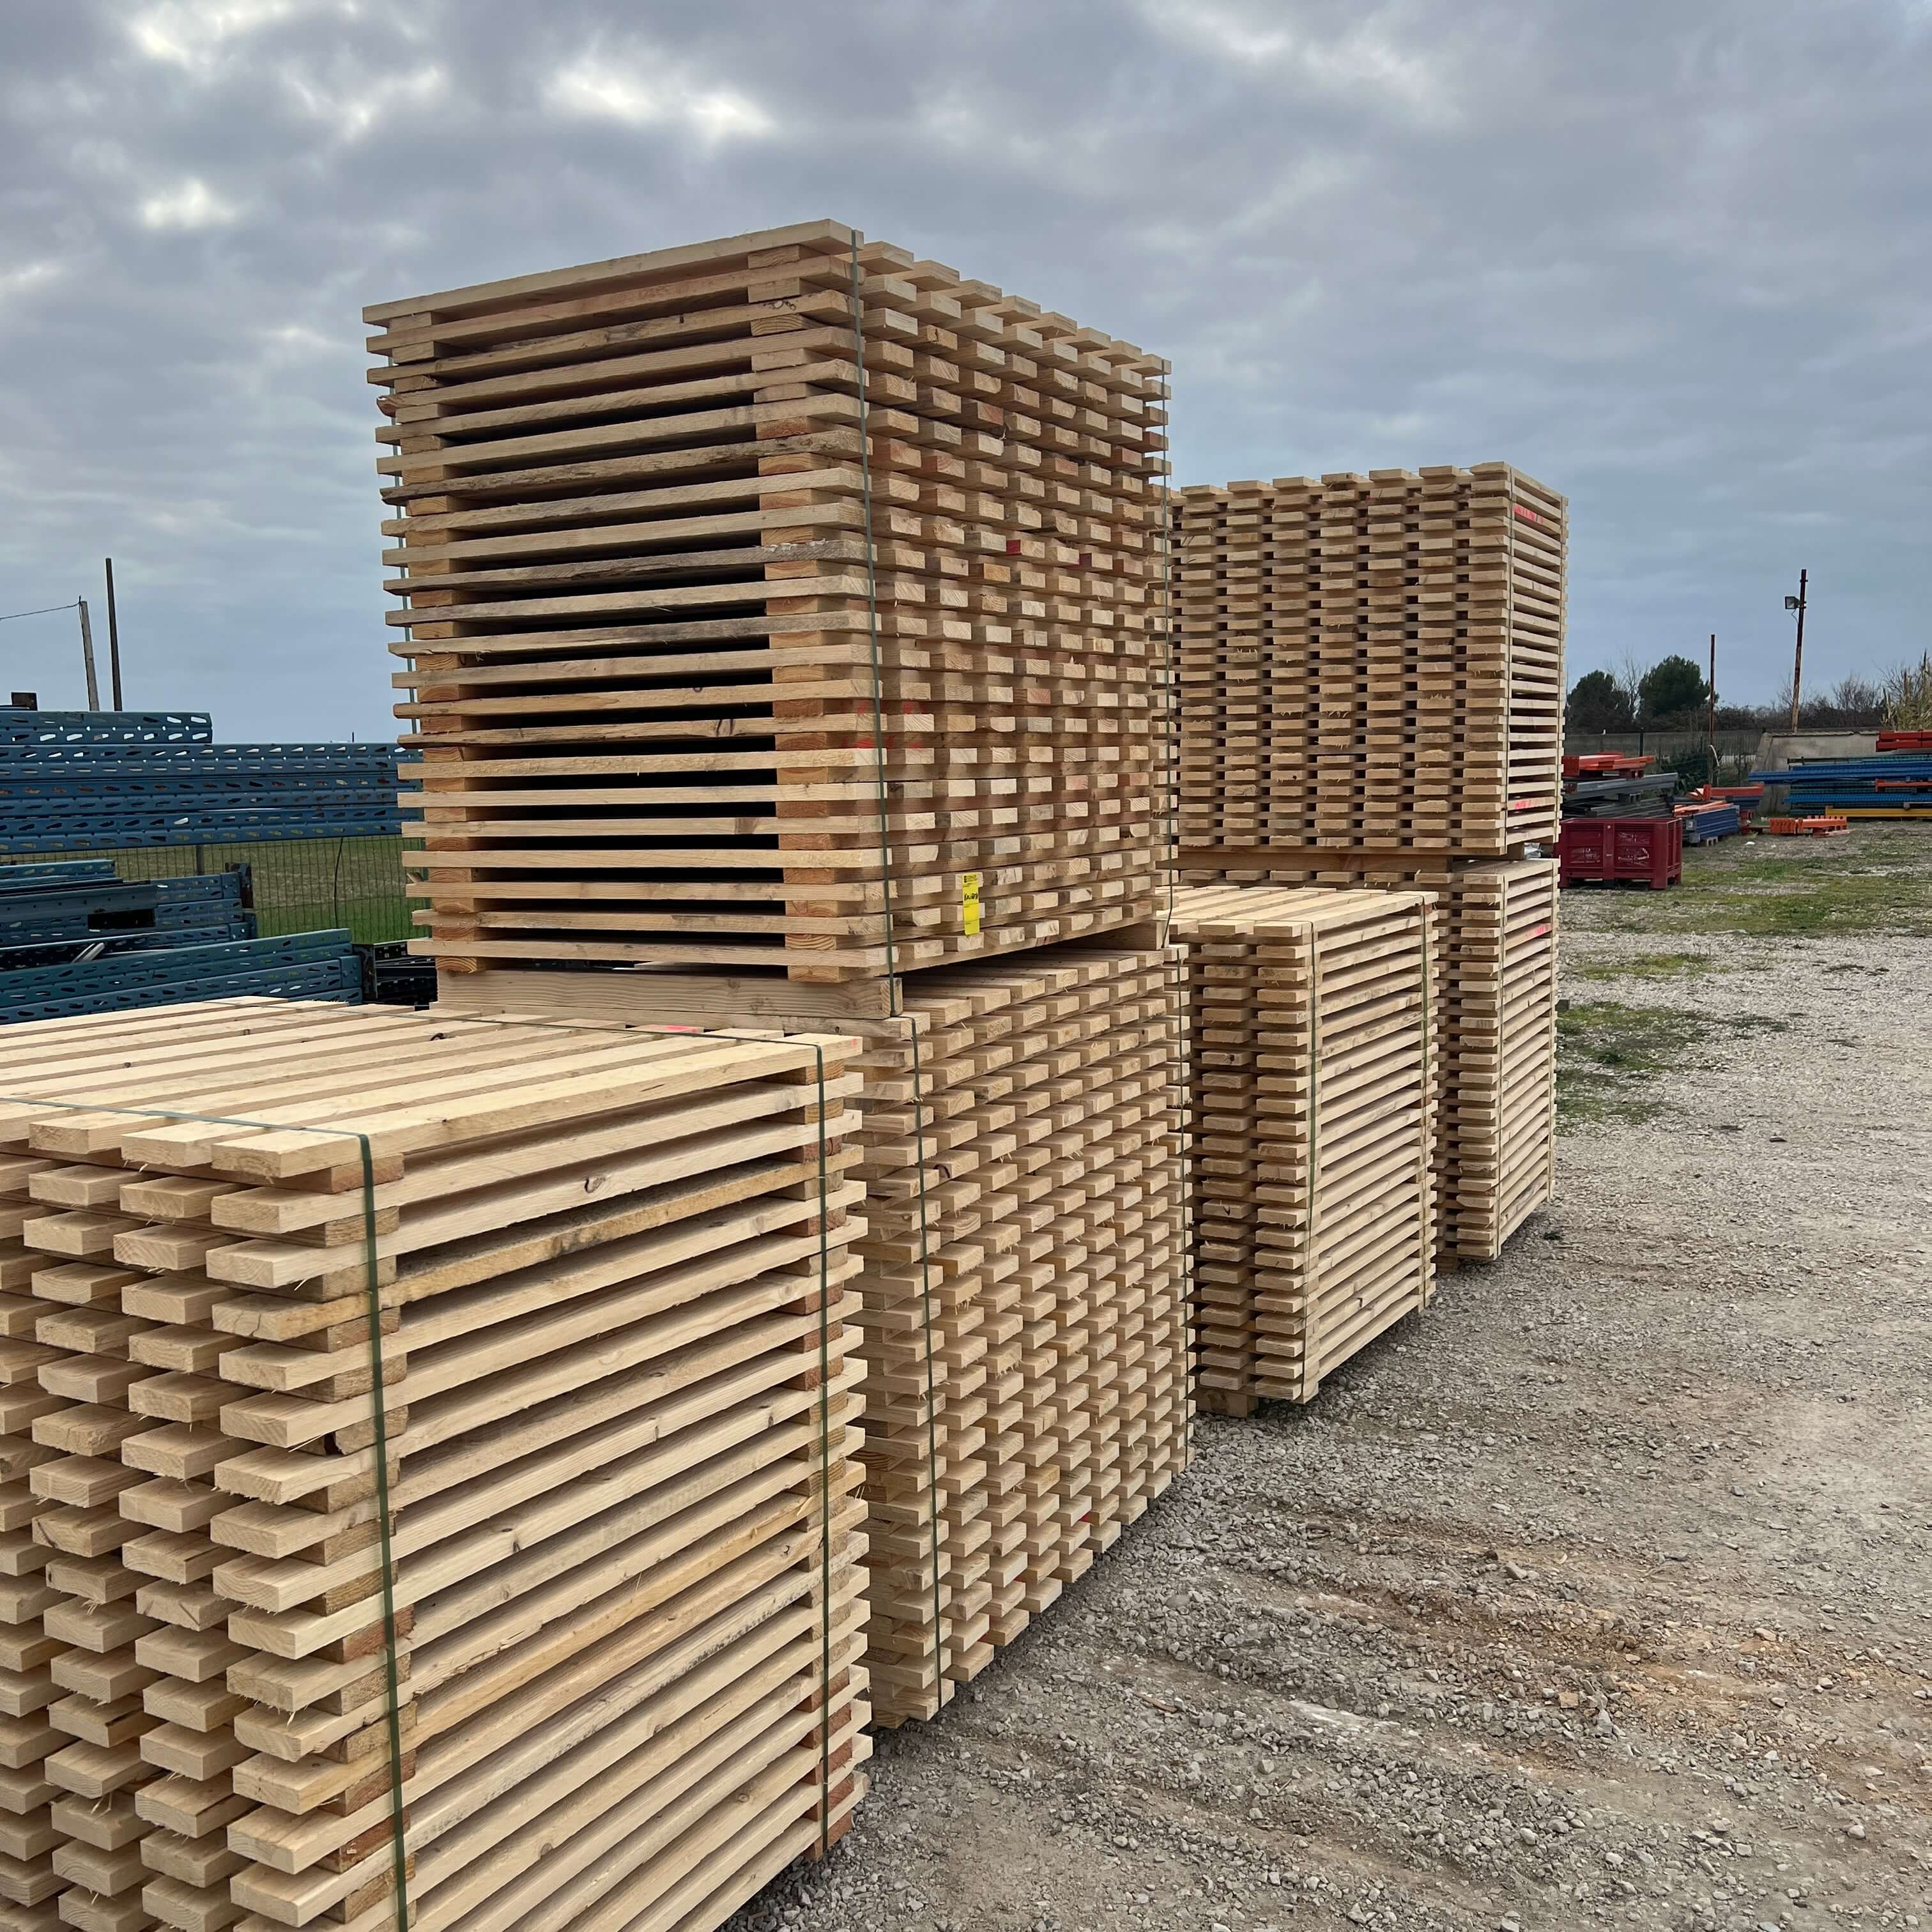 WOODEN TRAY 1340 X 1000 LOAD 800 KG